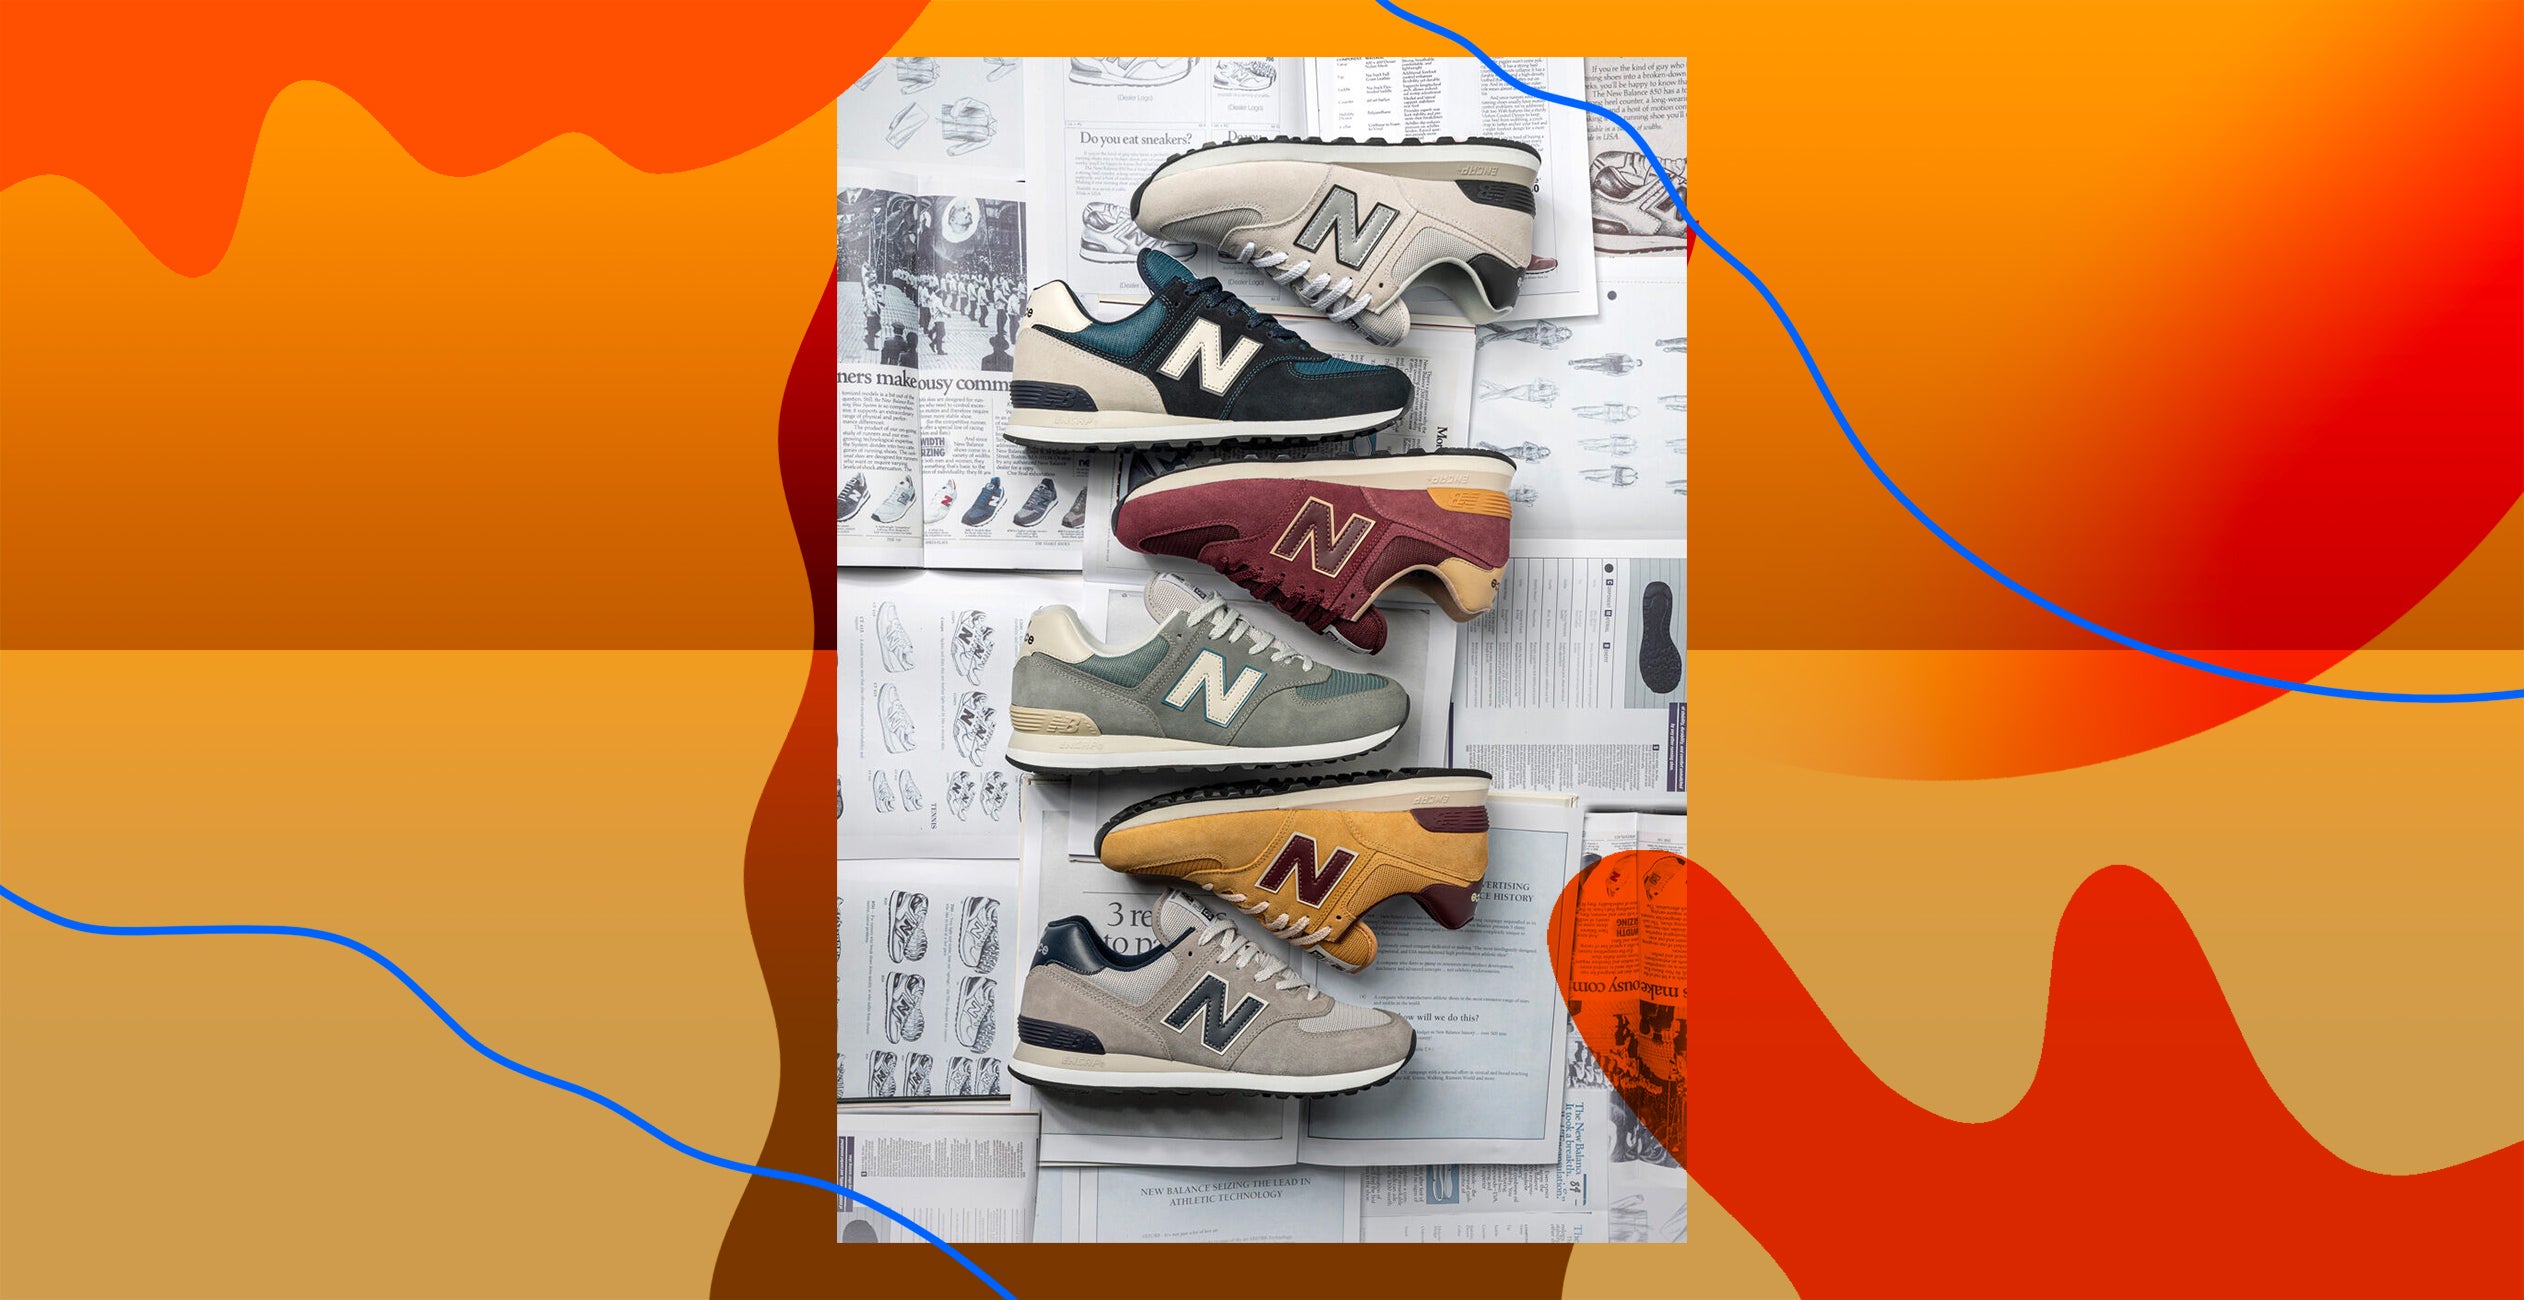 The Best New Balance Sneakers According To User Reviews بكيني خيط